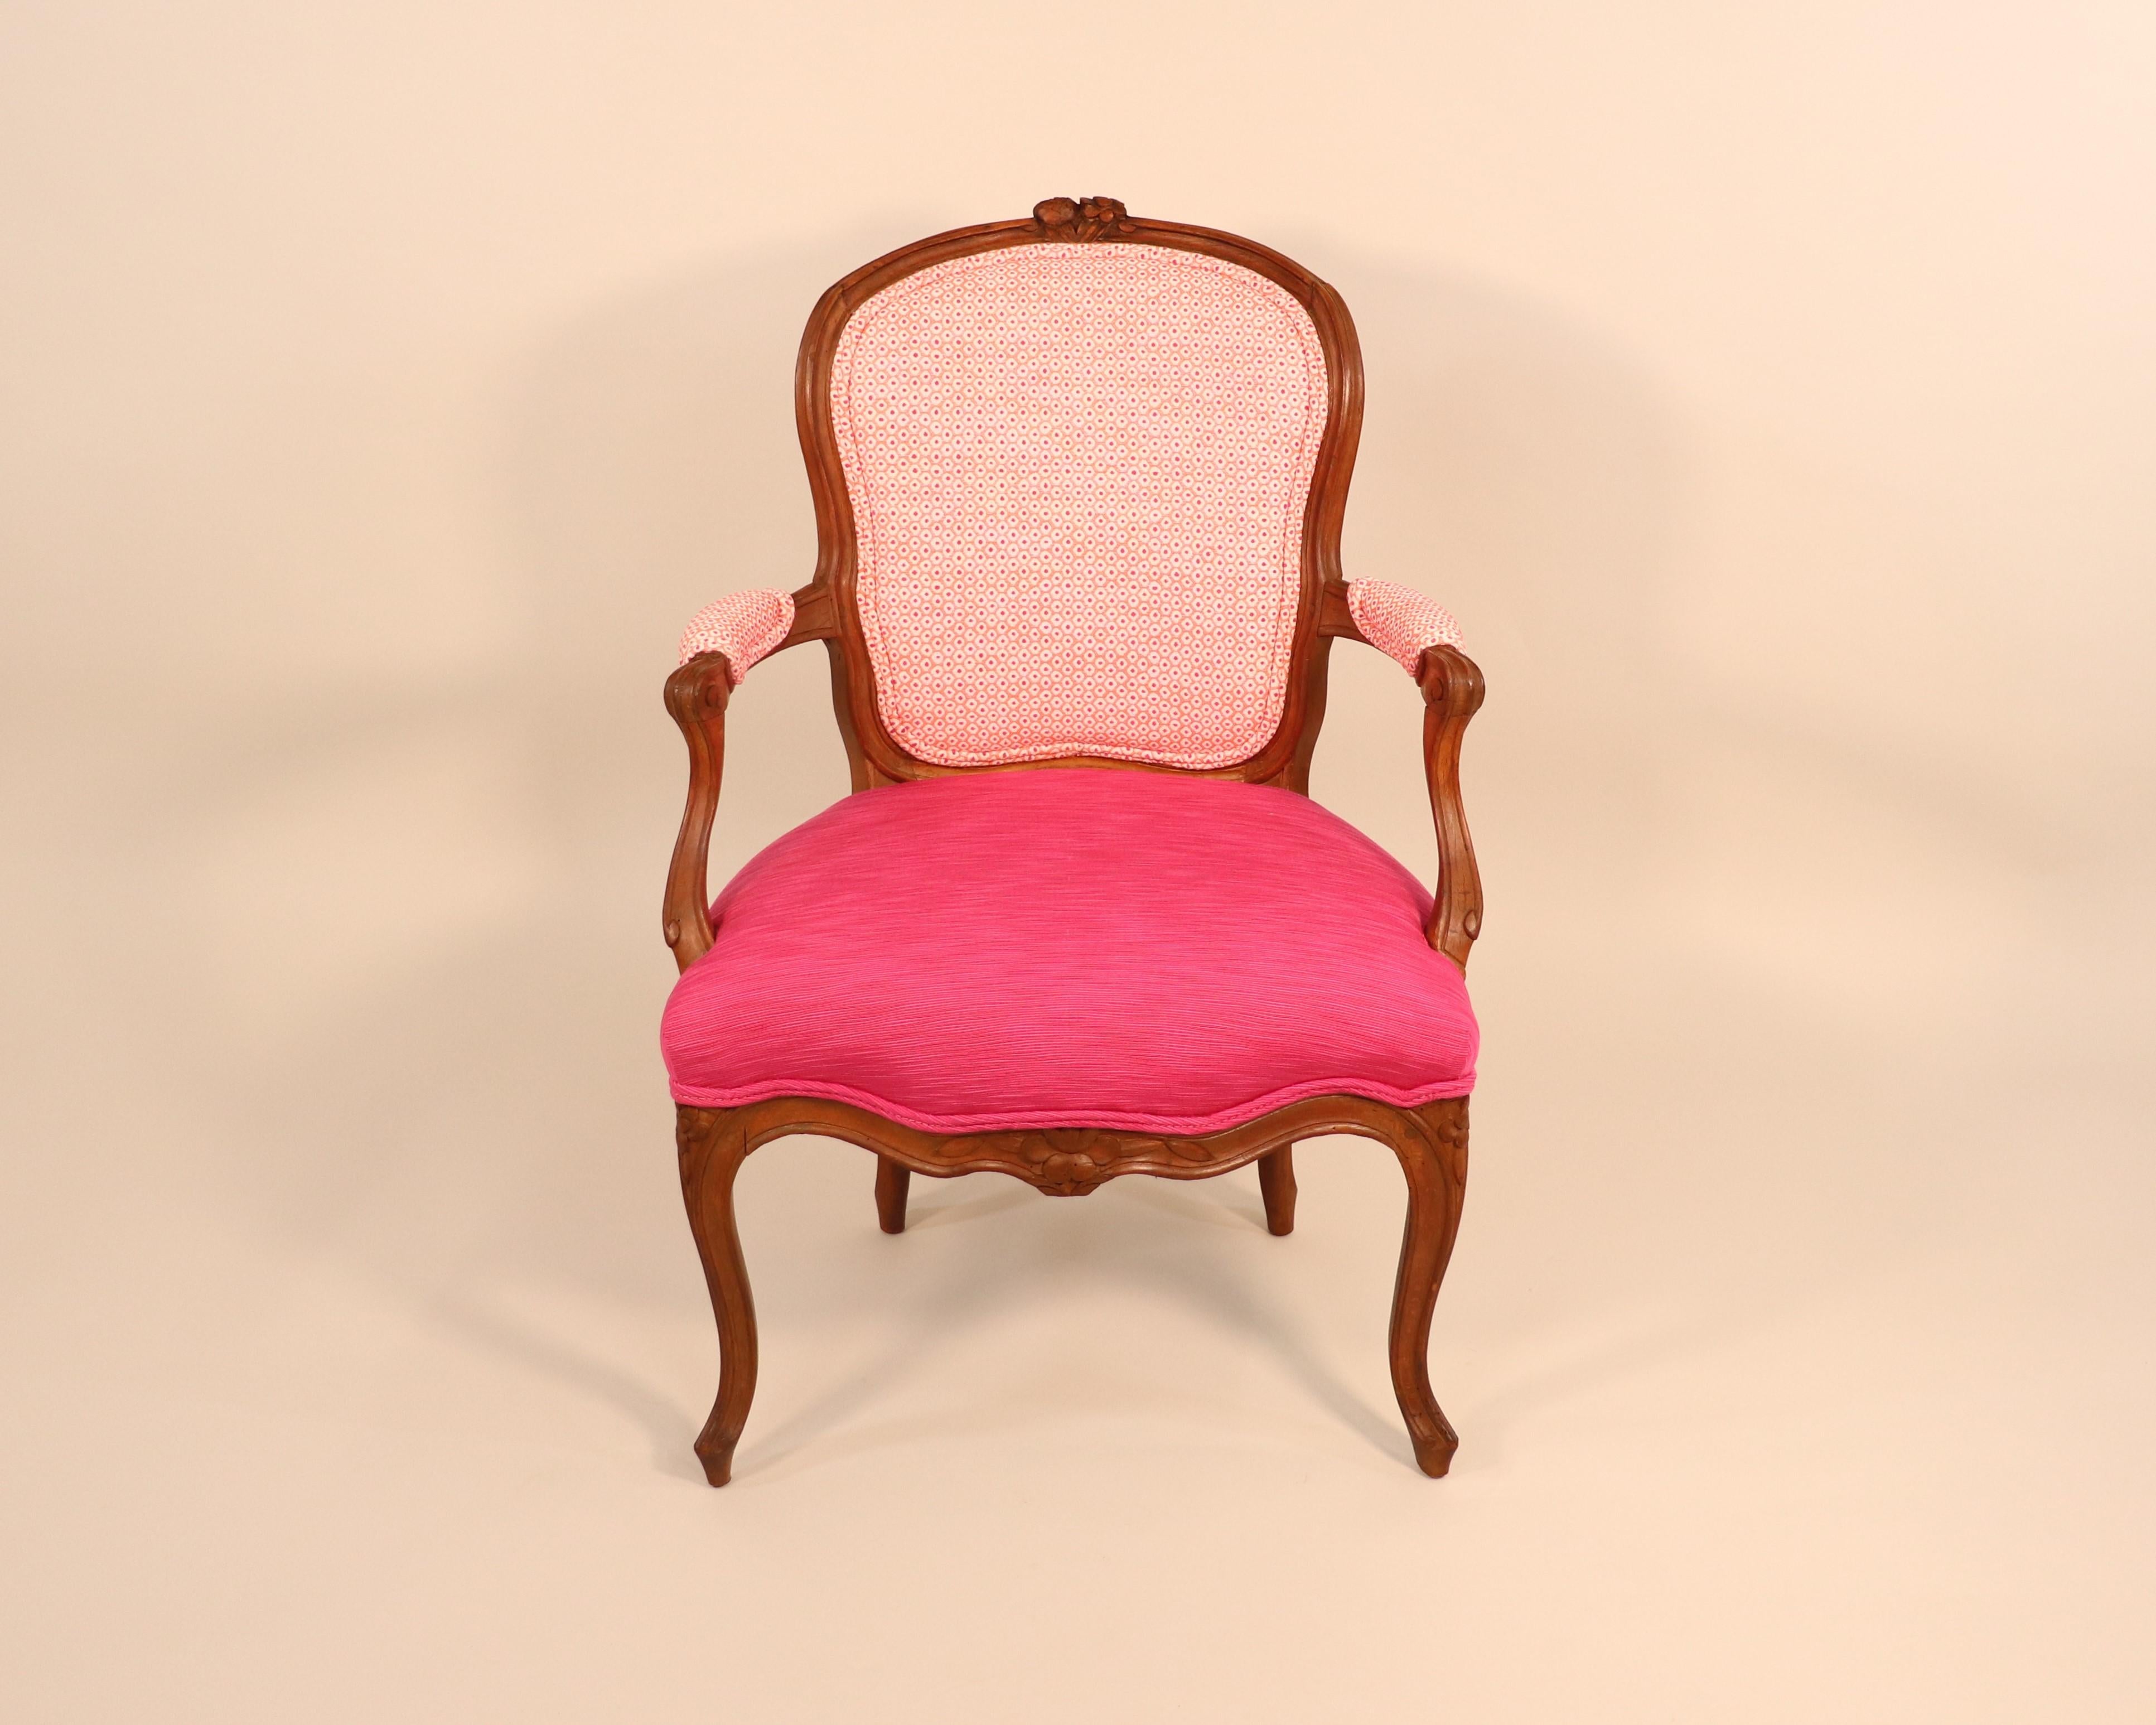 This 18th century French Louis XV Period fauteuil avec des courbes chair has been excellently crafted. Gentle S-curves and naturalistic floral motifs are characteristic of the period. It is theorized that during this period, the increased social